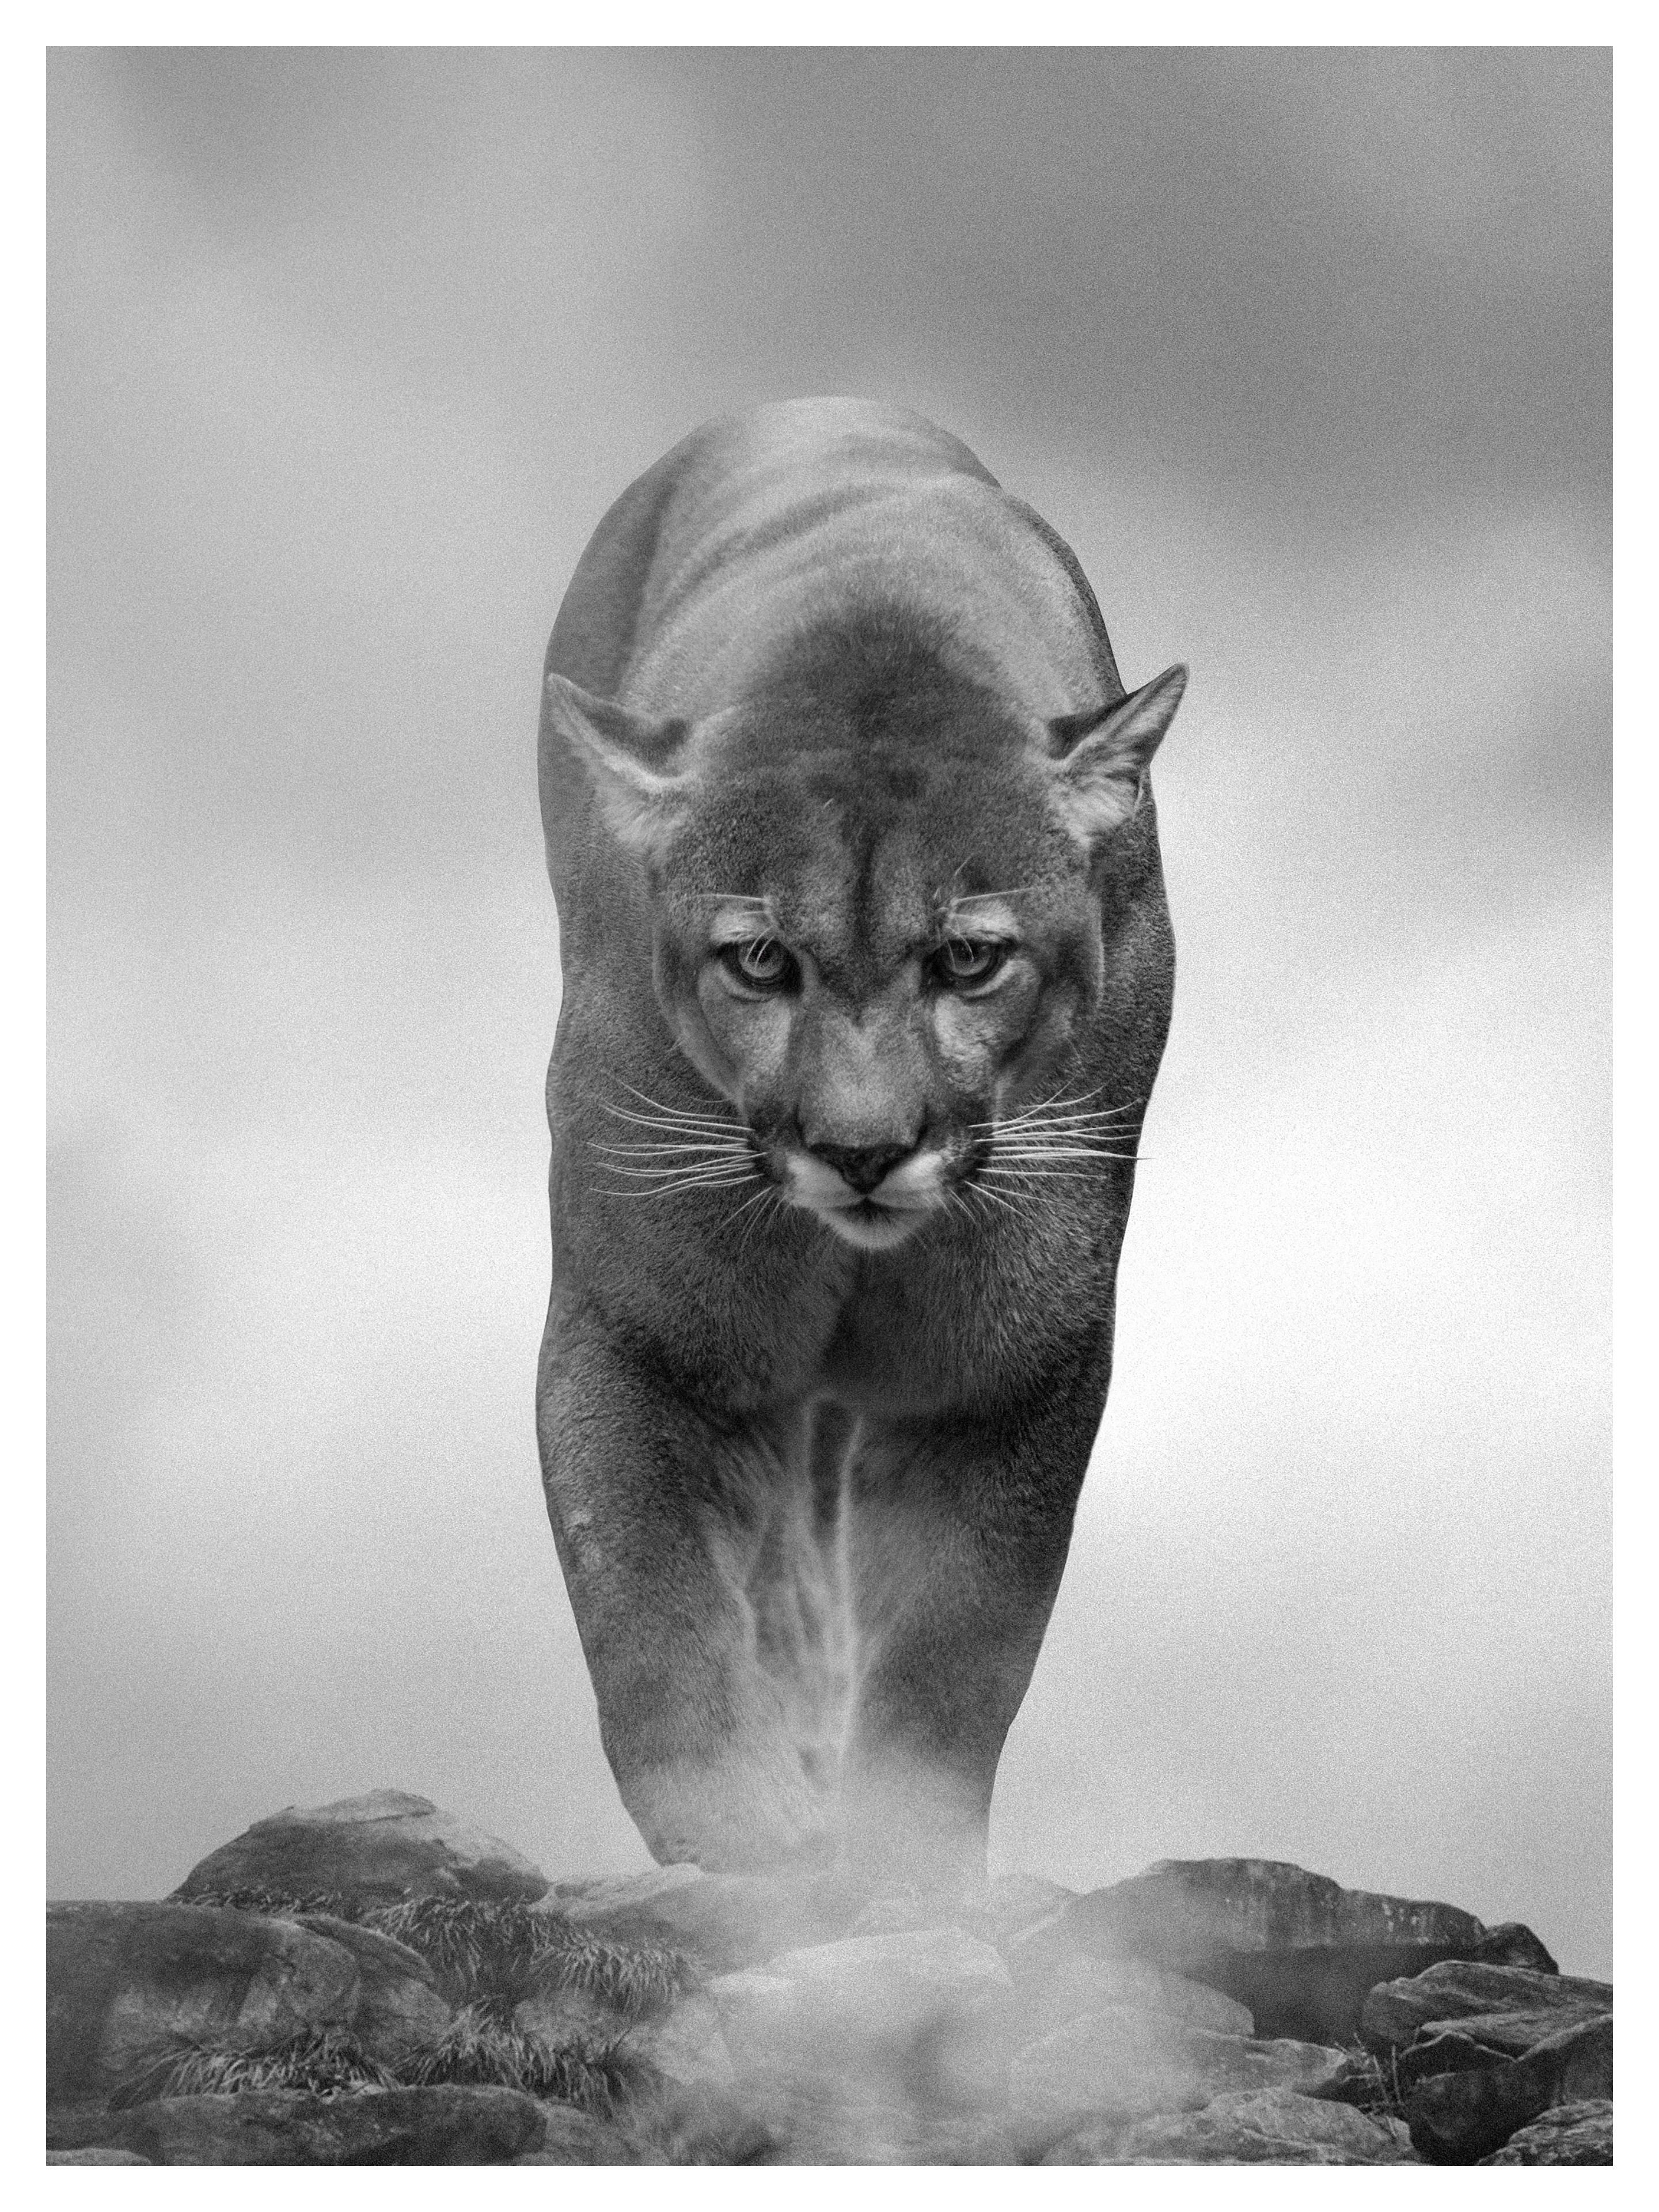 This is a contemporary photograph of a Mountain Lion. 
48x36 Archival Pigment print, Edition of 12. Signed by Shane in the bottom right corner. 
Framing available. Inquire for rates. 
FREE SHIPPING

Shane Russeck has built a reputation for capturing